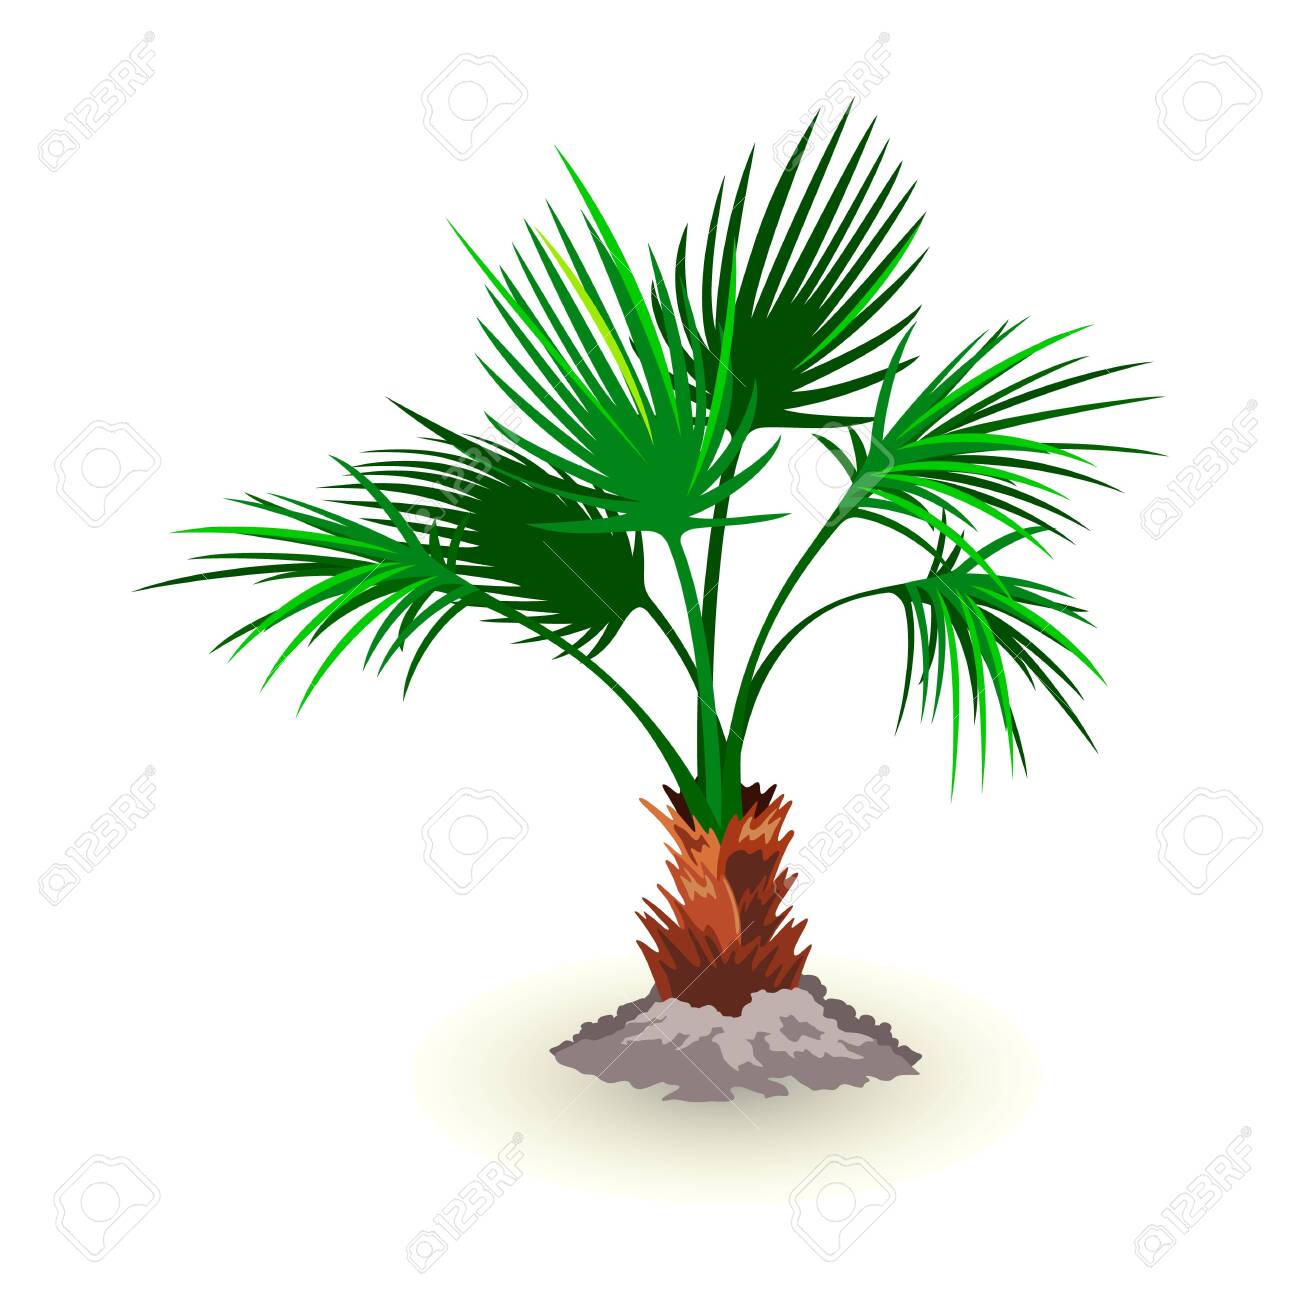 Isolated Vector Image Shows Dwarf Palmetto Tree With Huge Lush